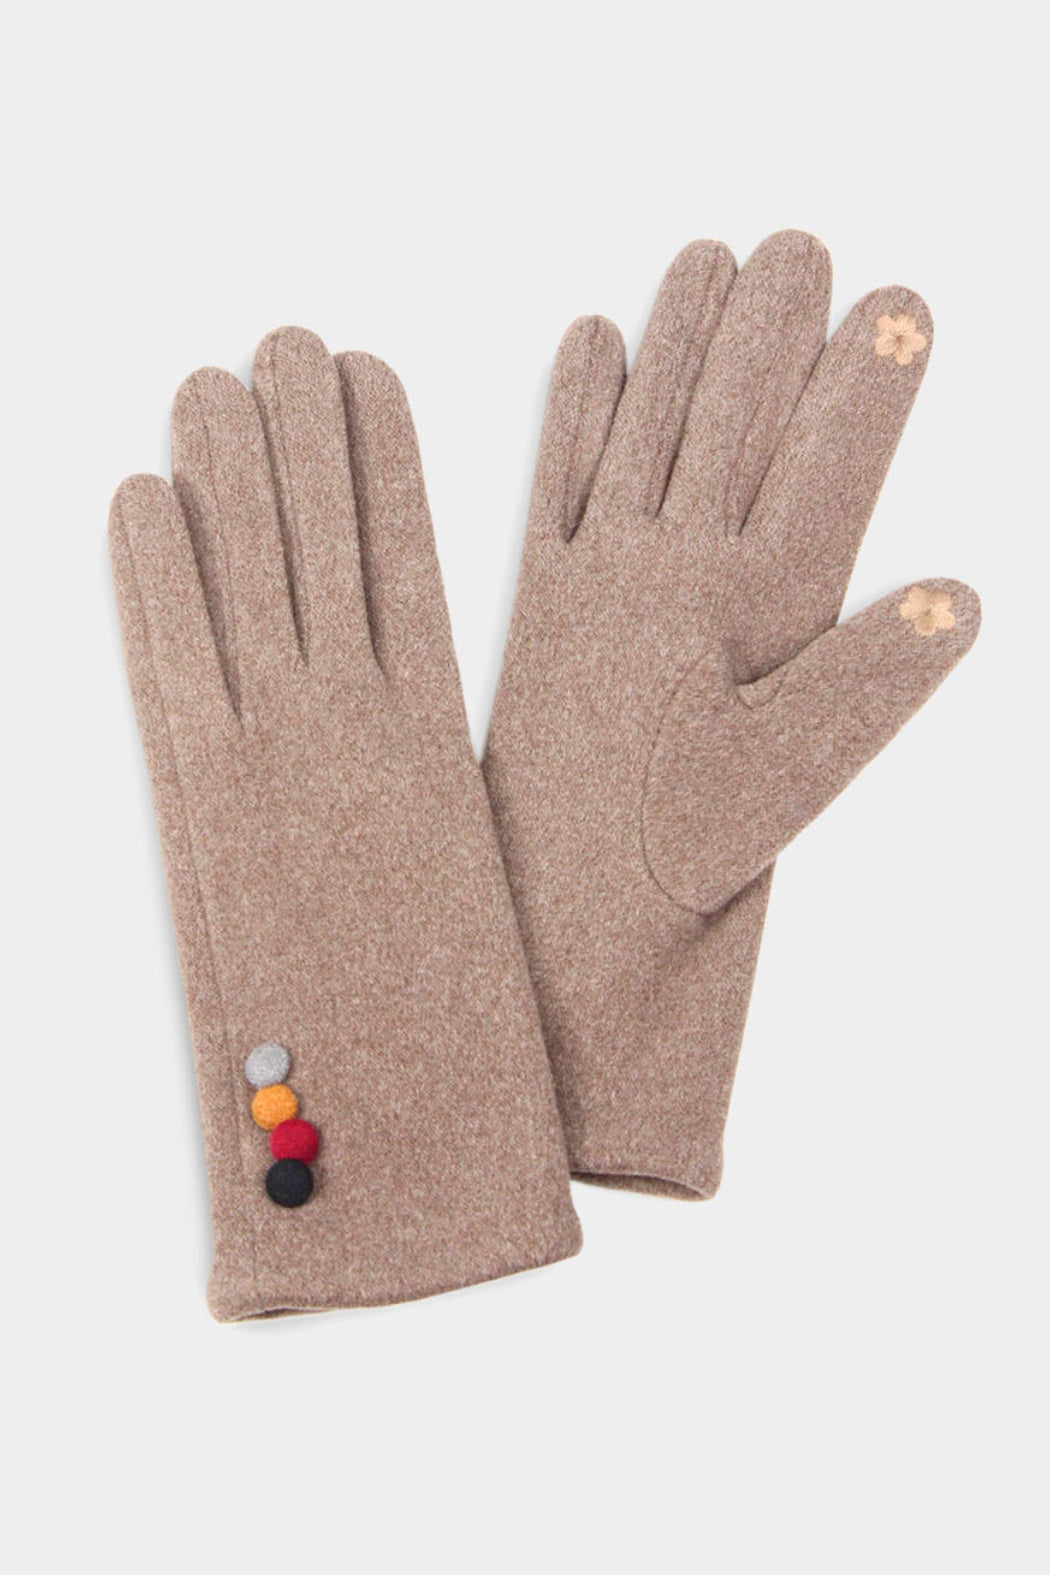 4 Button Gloves - Embellish Your Life 